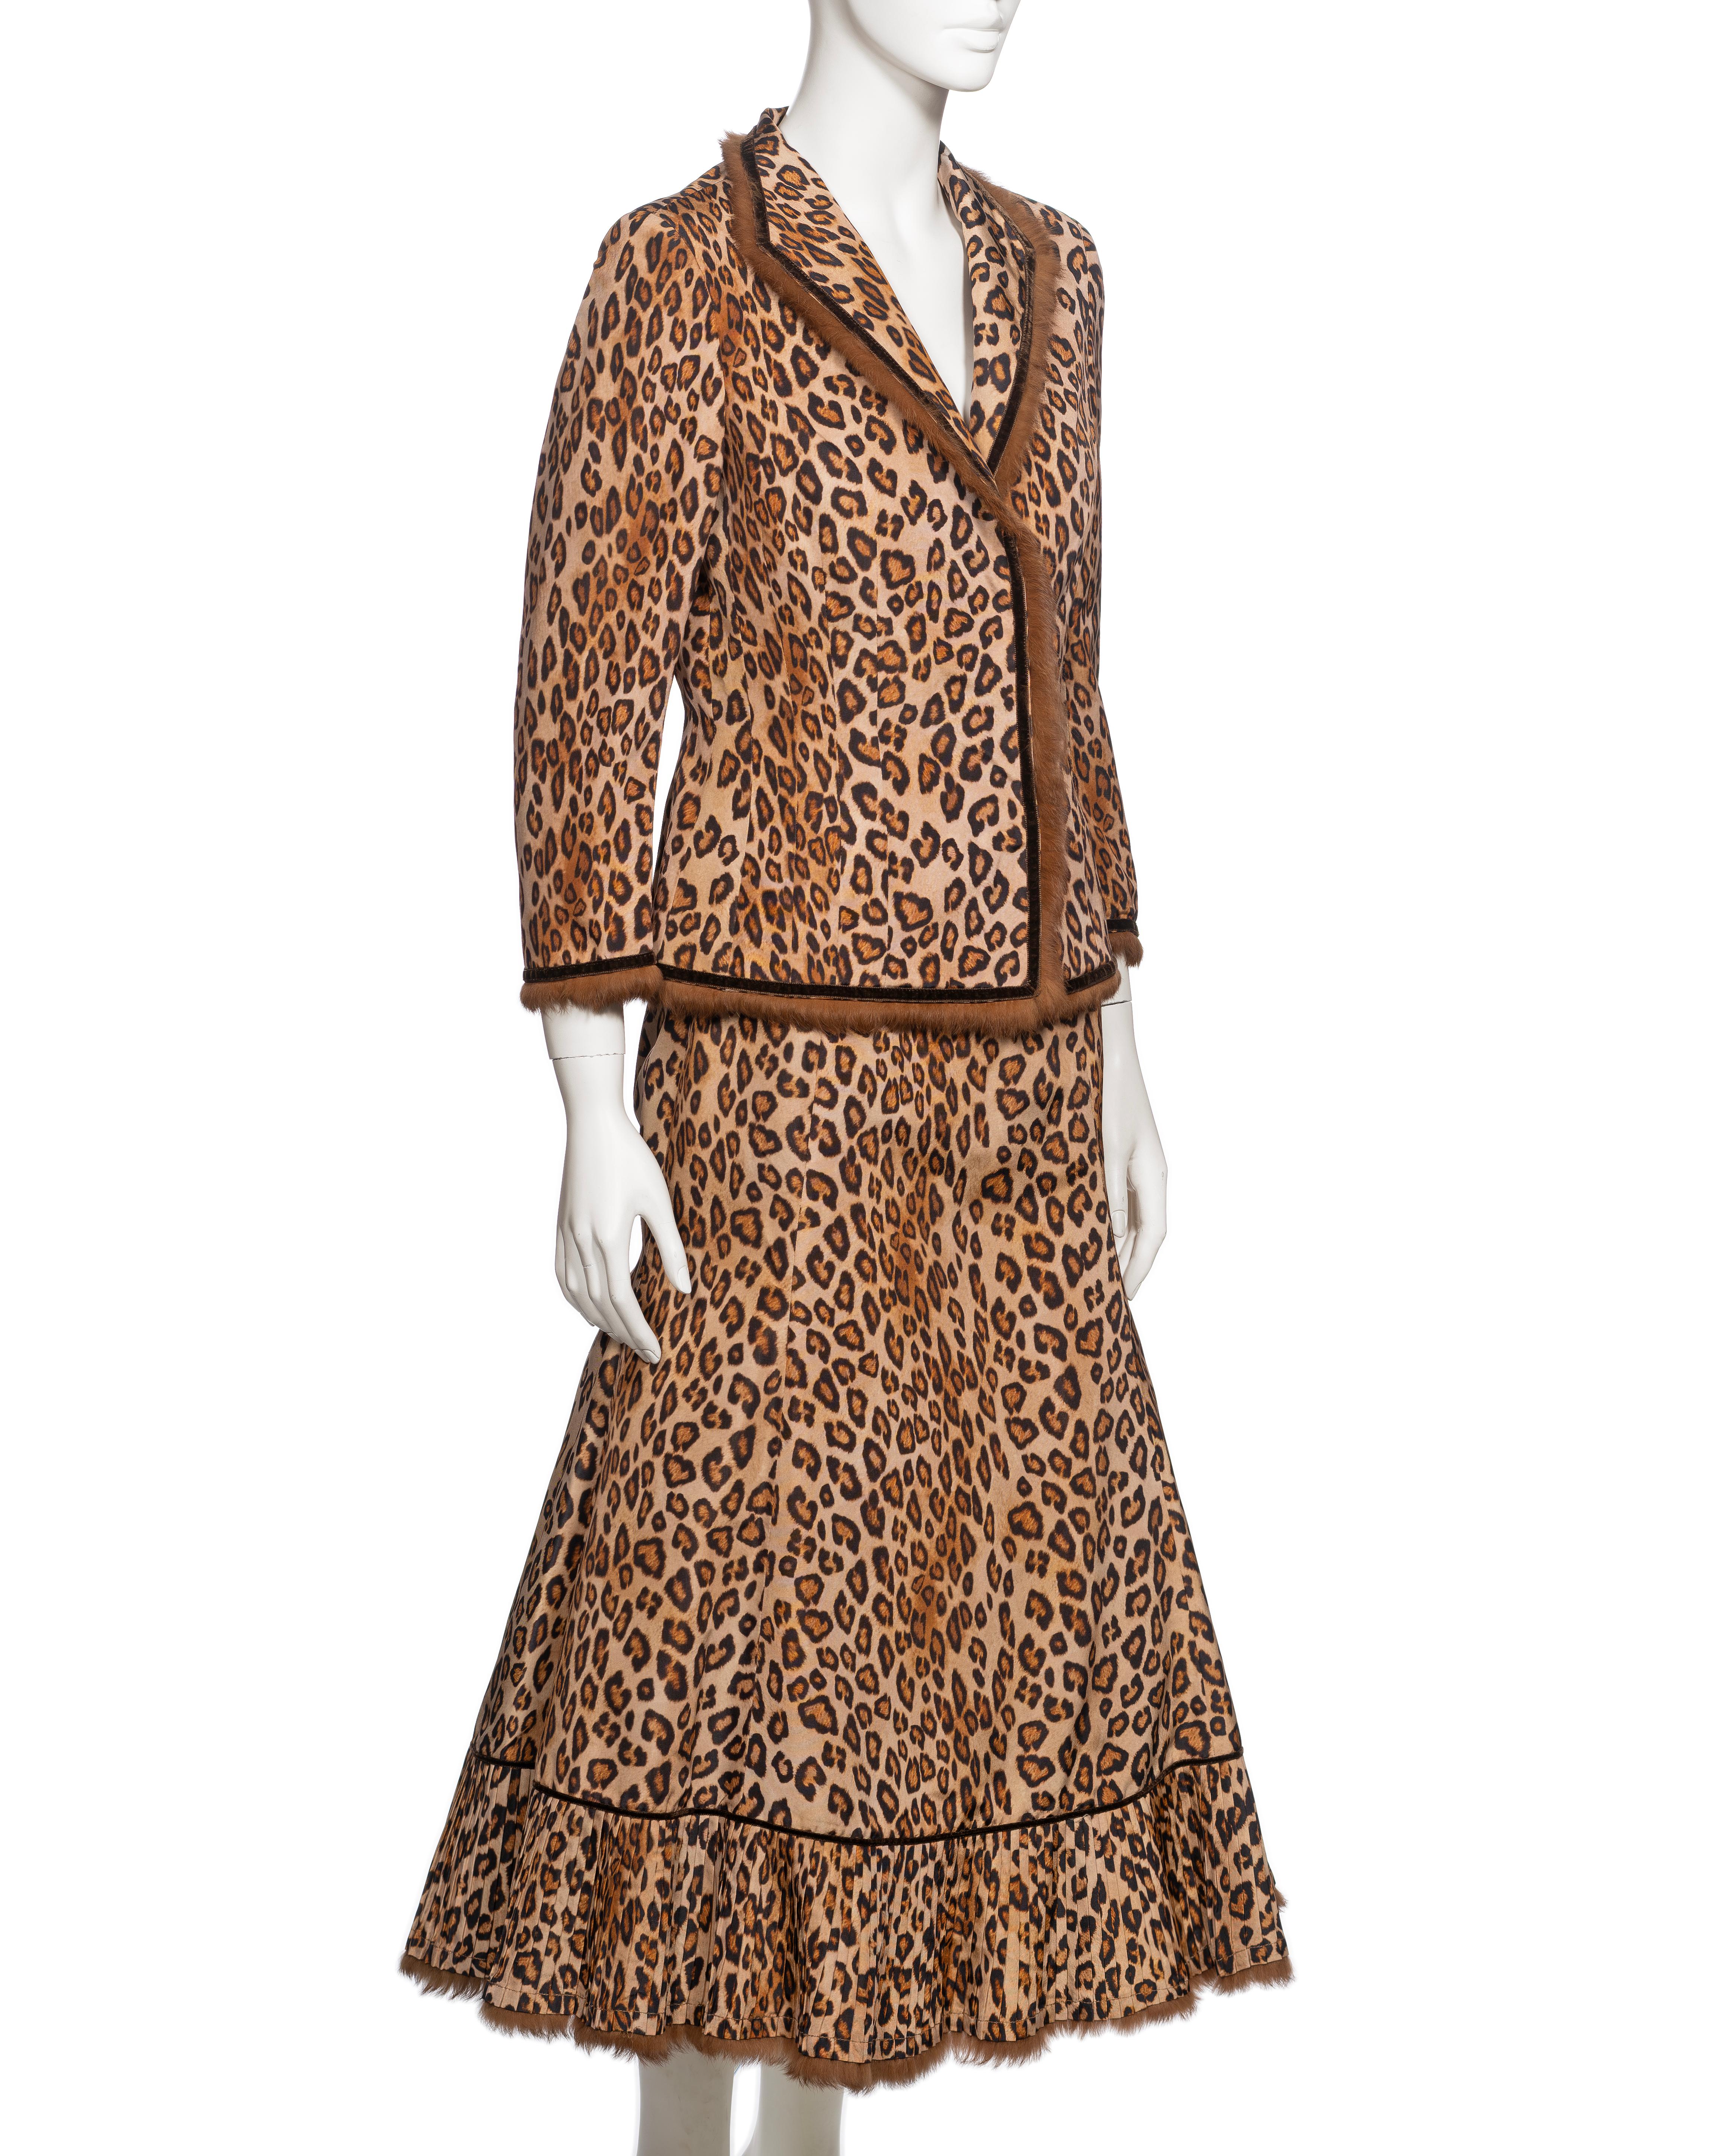 Alexander McQueen Leopard Print Silk and Fur Jacket and Skirt Suit, FW 2005 For Sale 2